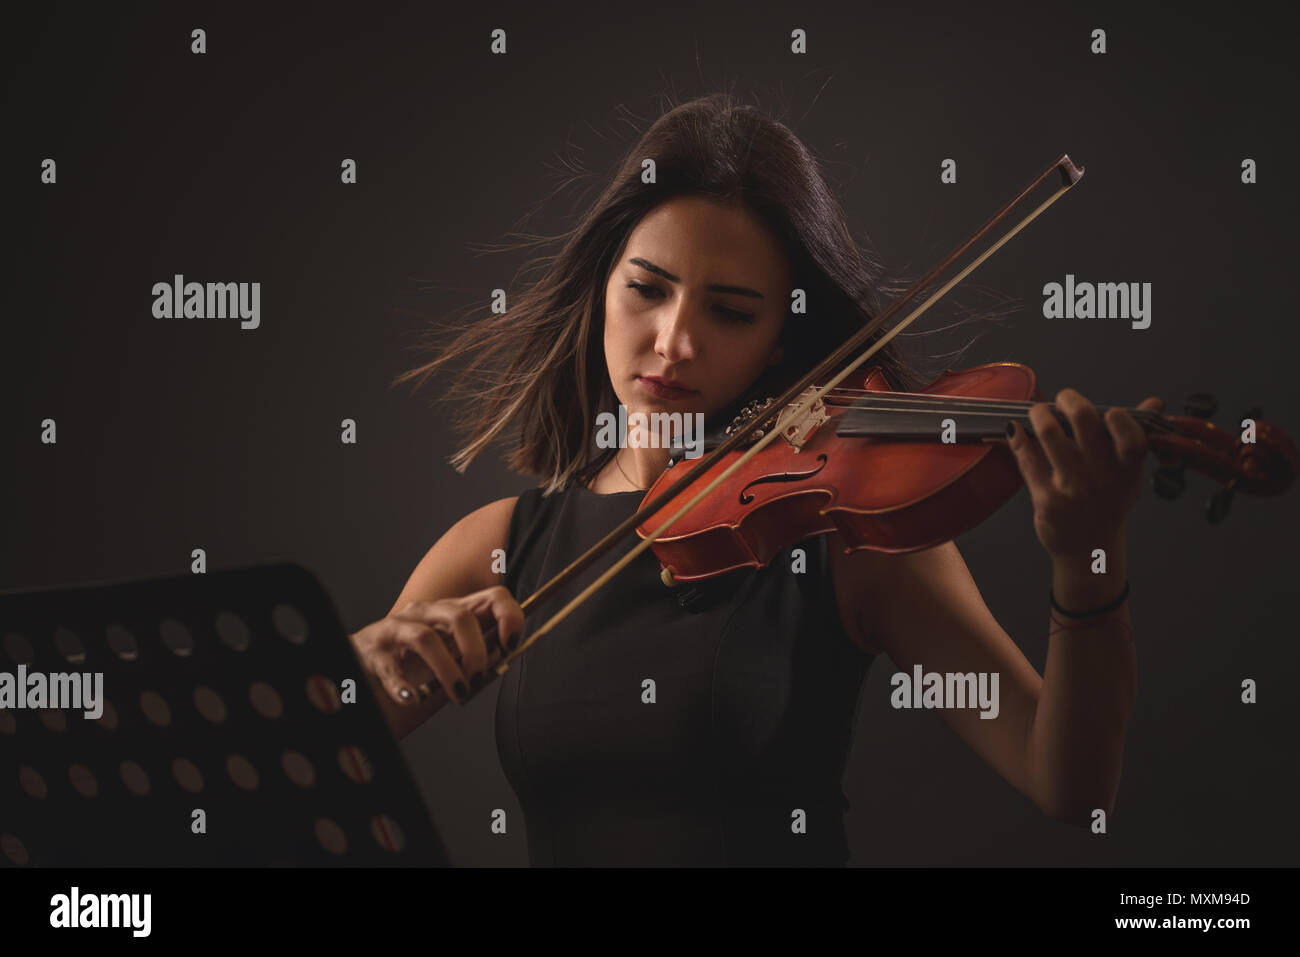 Pretty young woman playing a violin over black background. Stock Photo